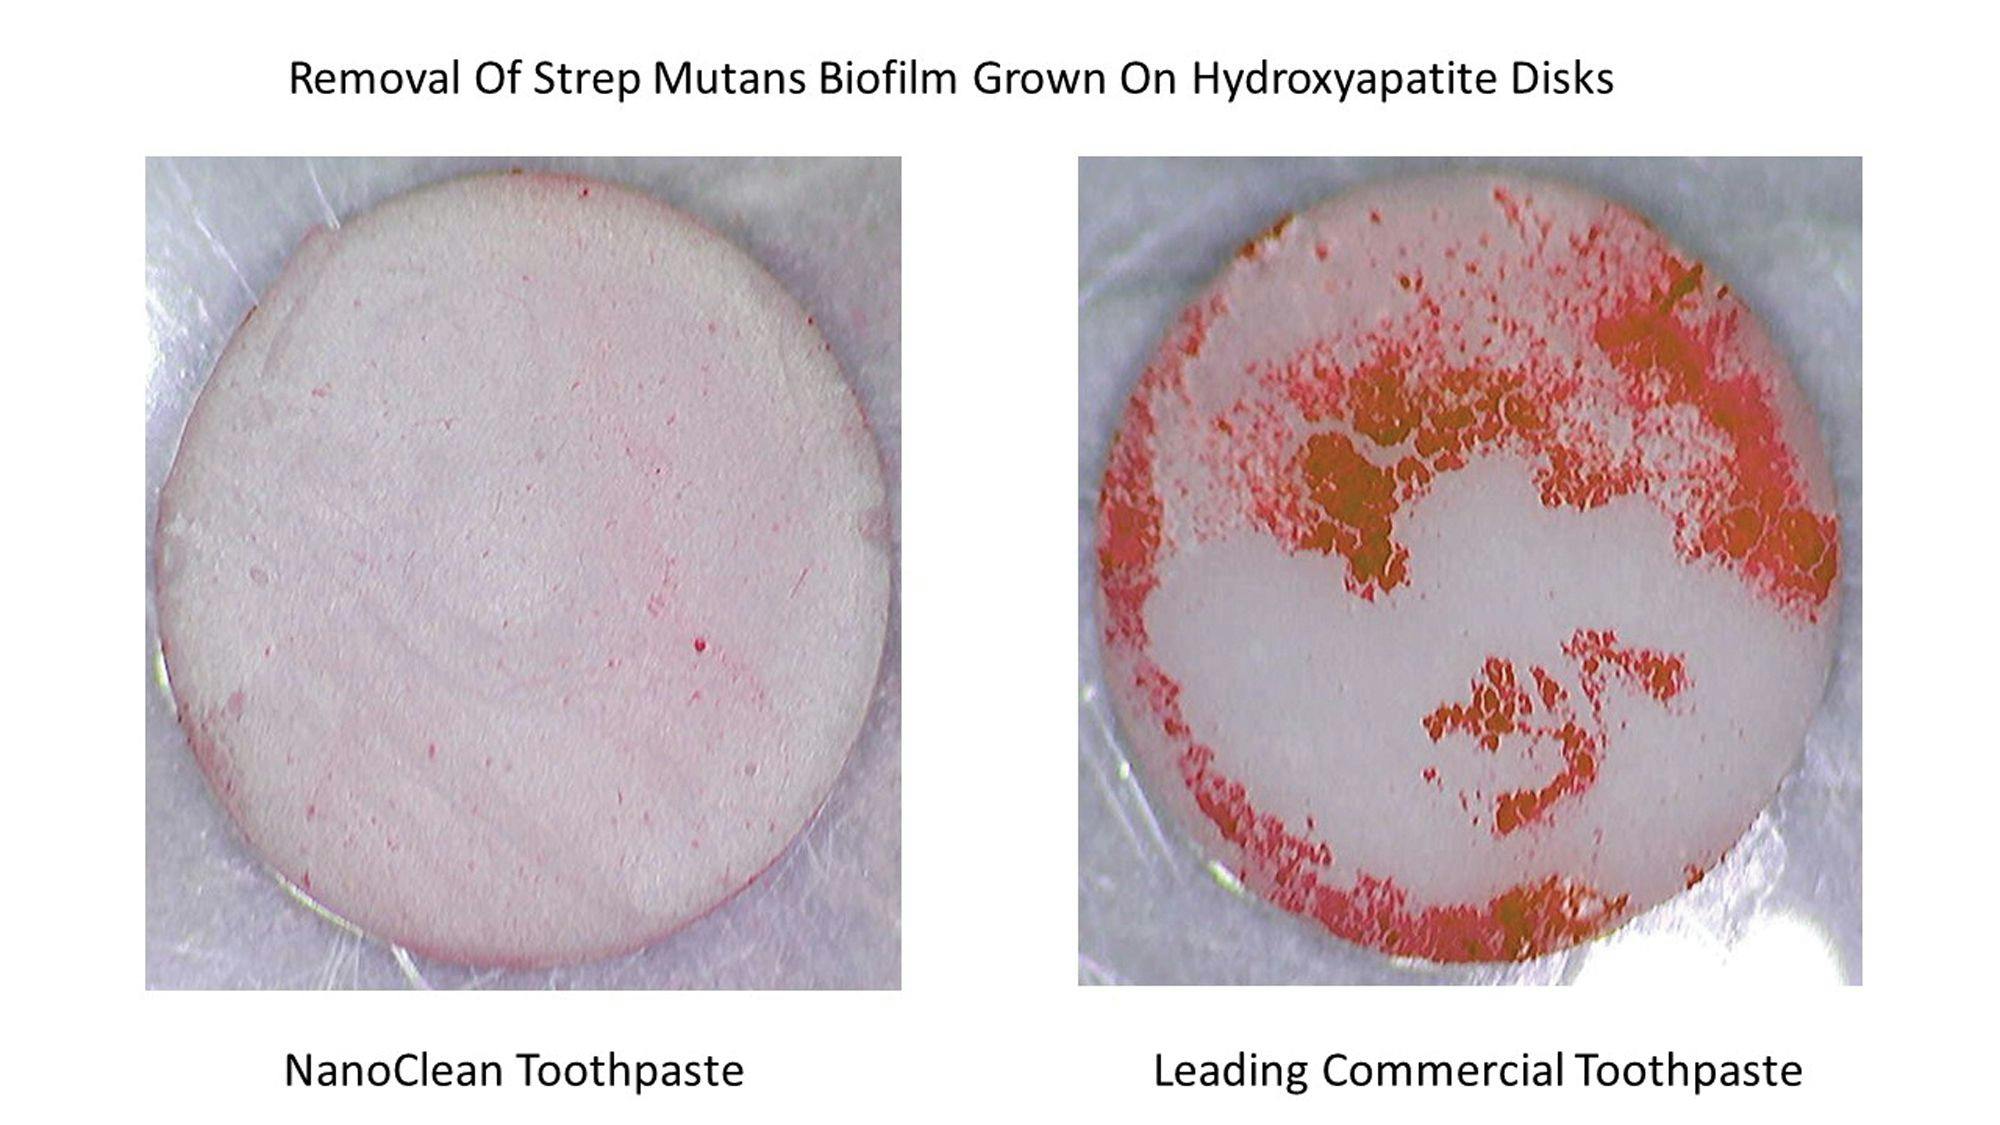 A Novel Toothpaste With Superior Plaque and Biofilm Removal